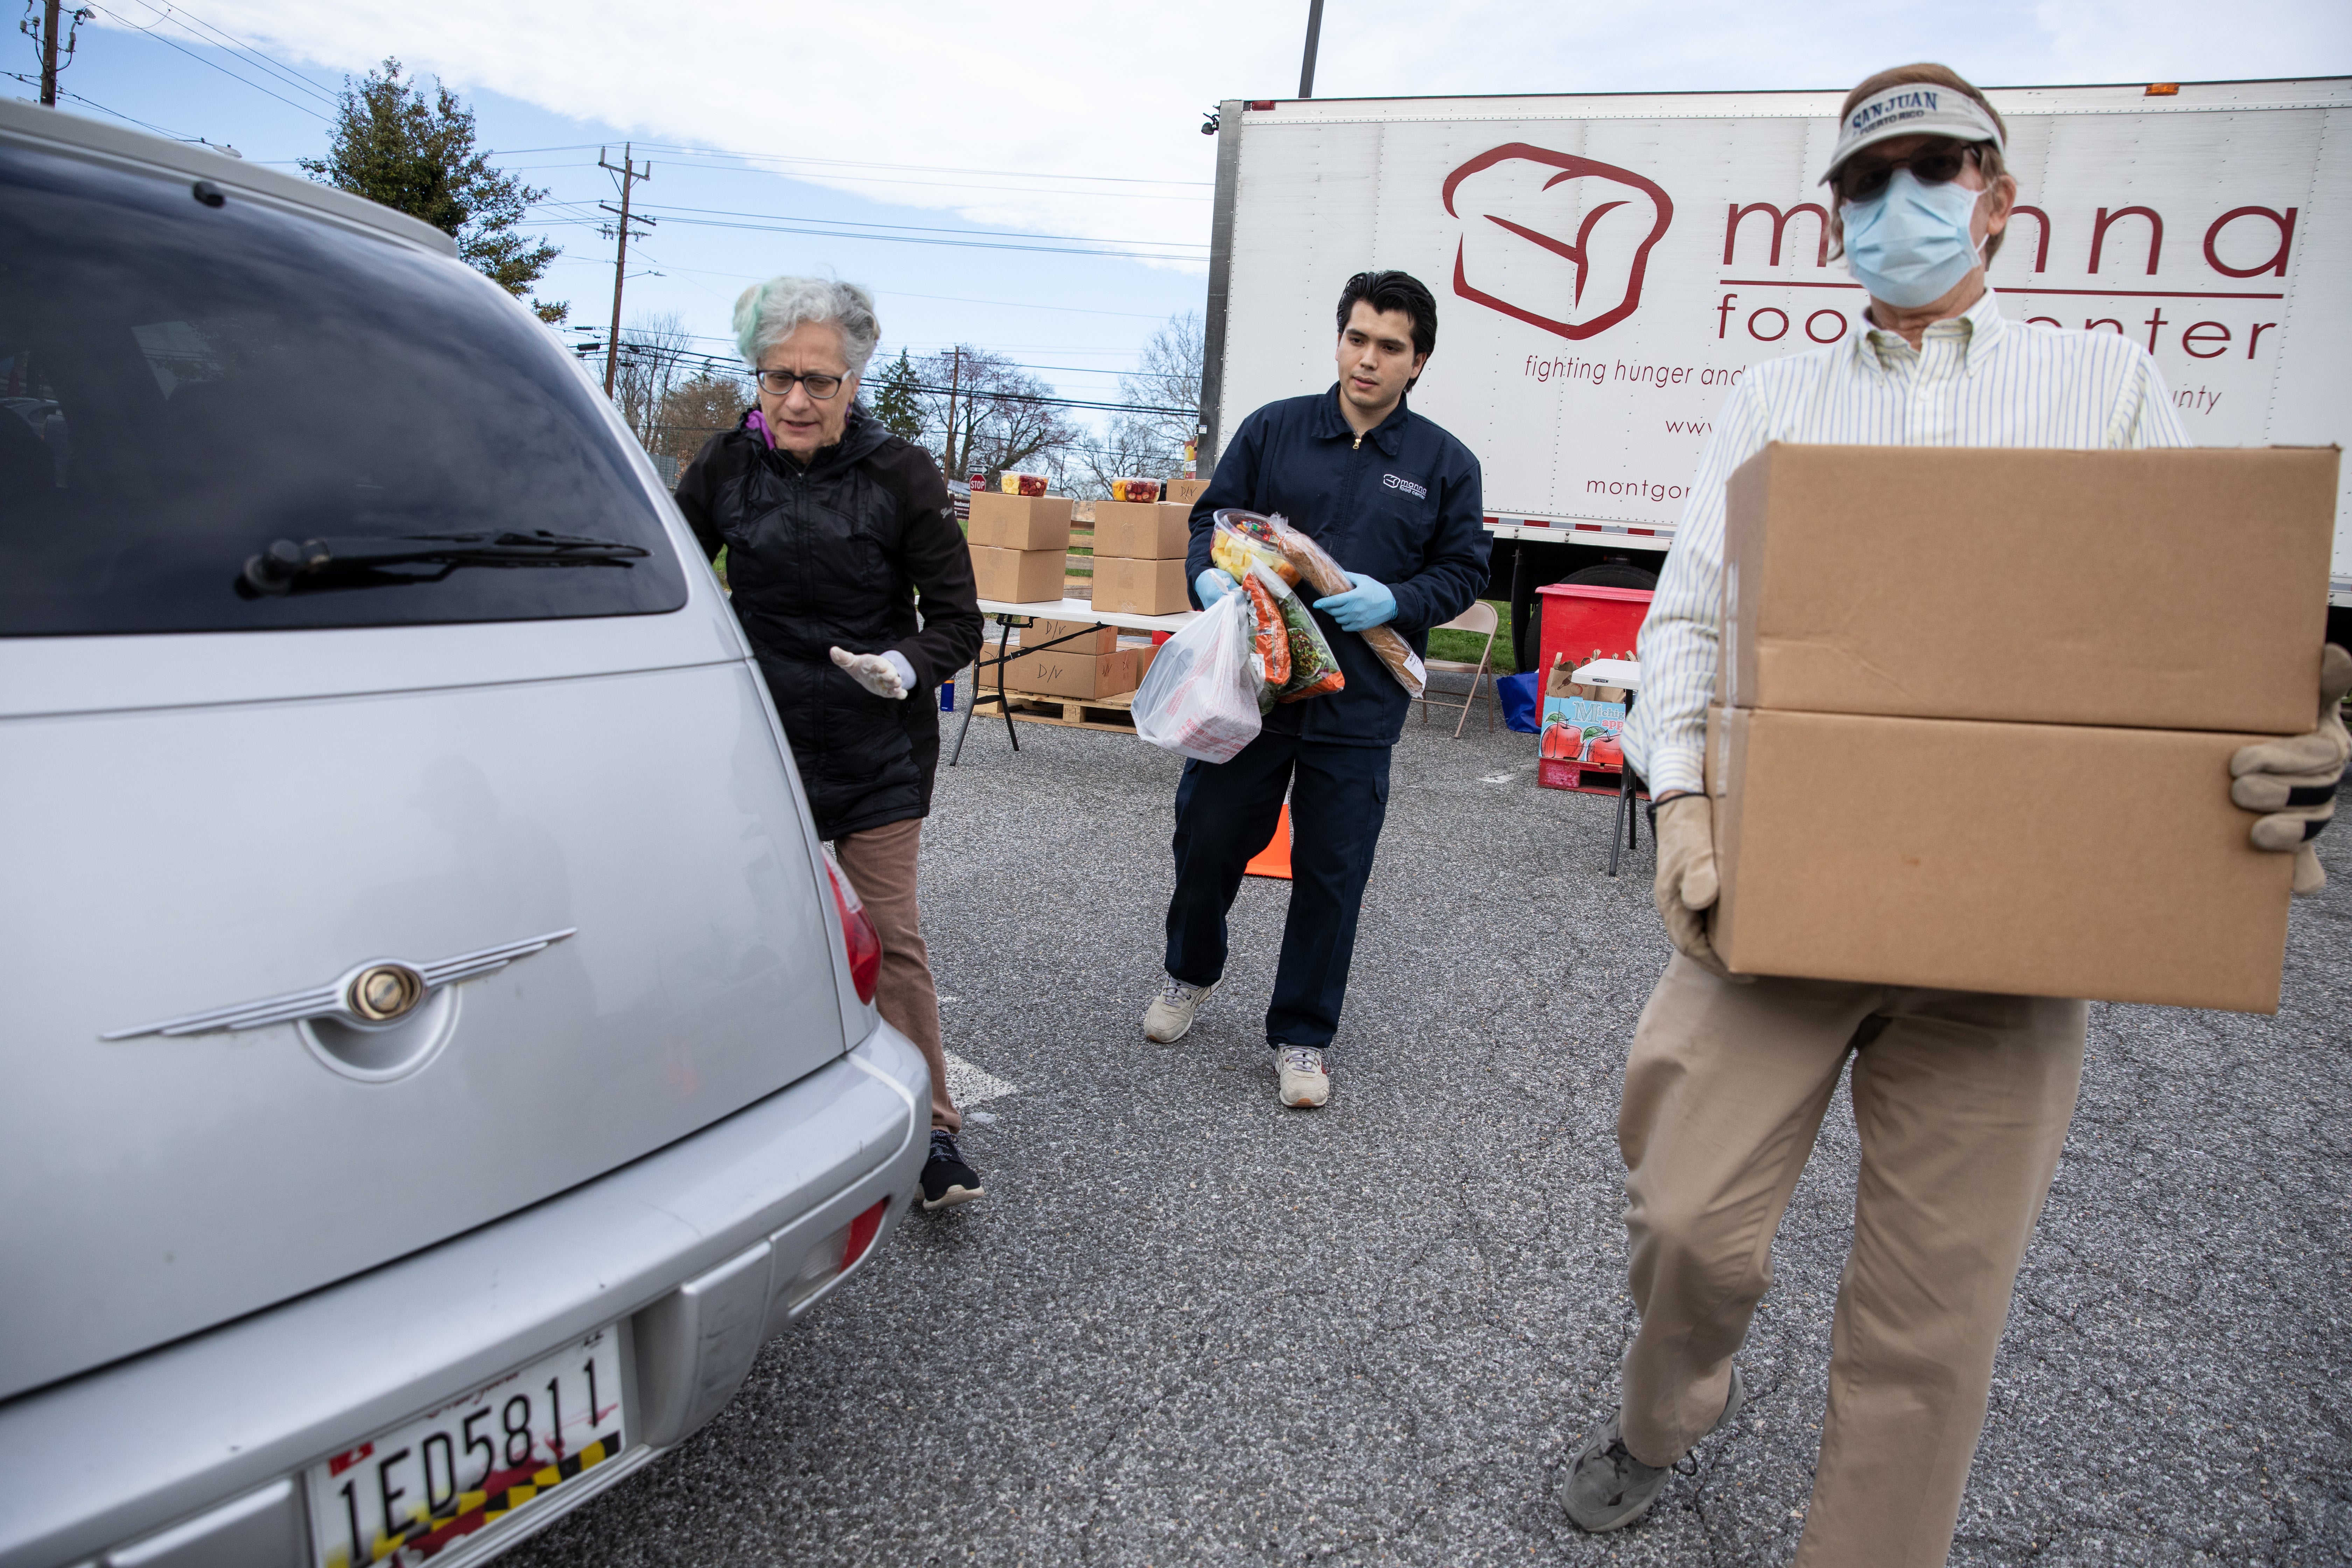 Volunteers load food into cars at a meals site in Maryland.